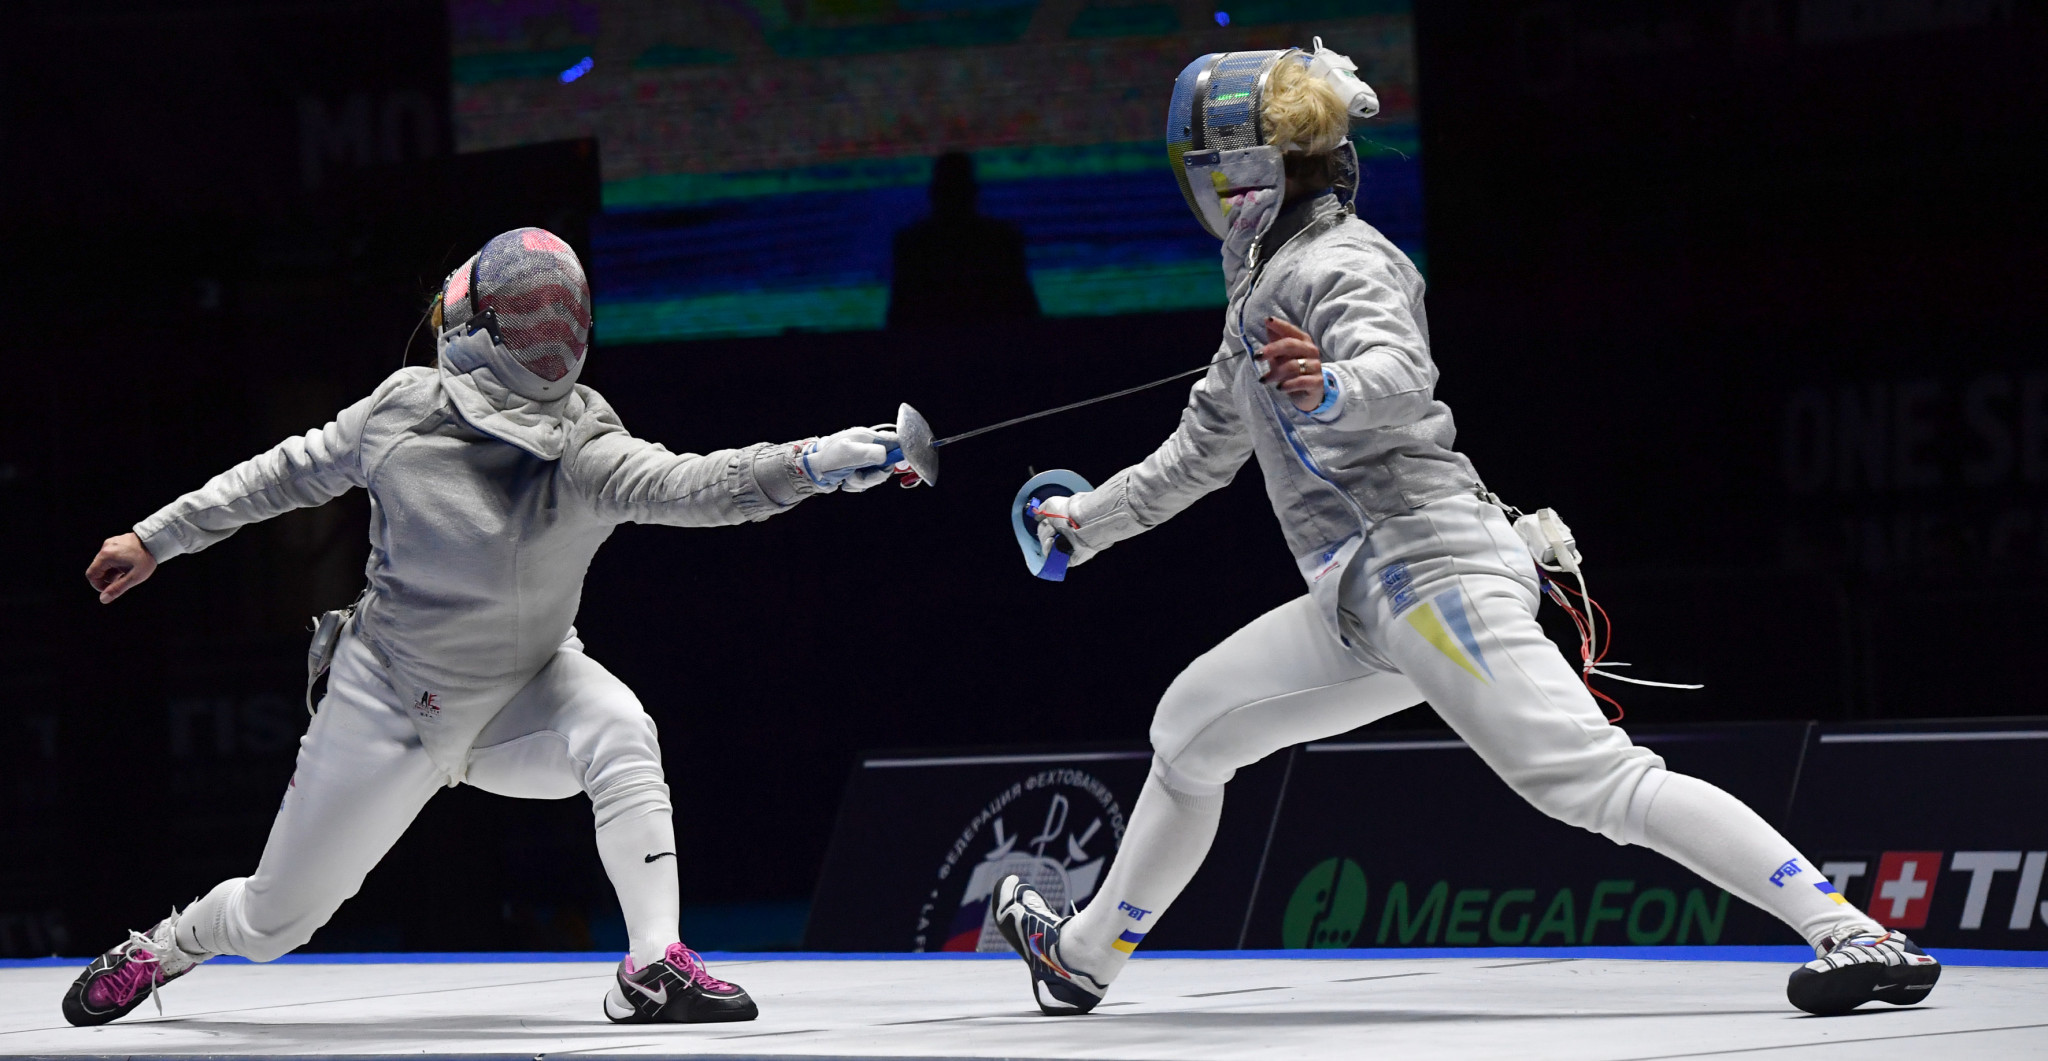 The FIE Sabre Grand Prix got underway with women's qualifying today in Seoul ©Getty Images